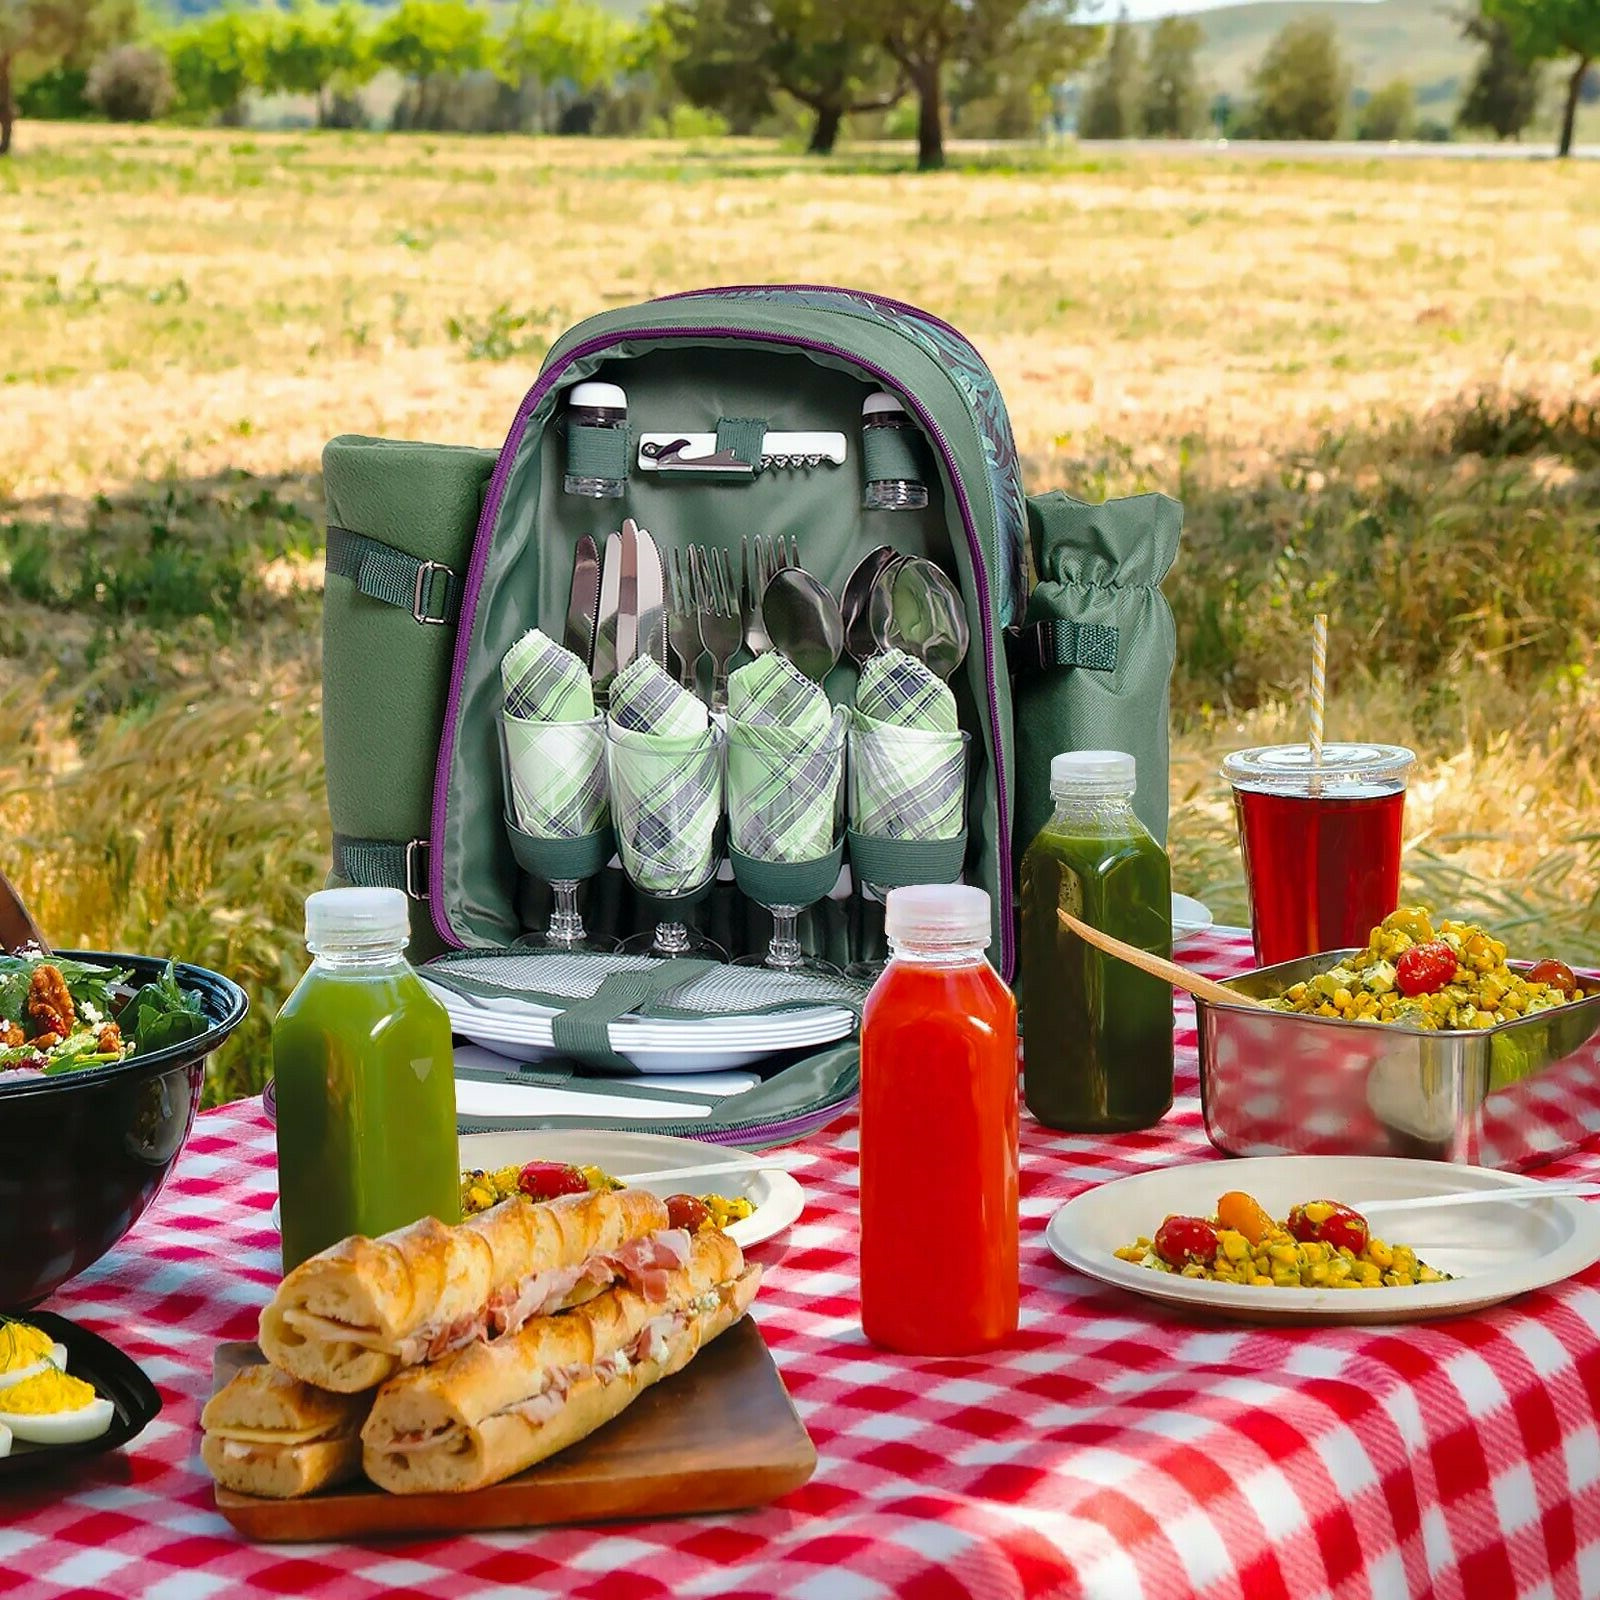 Flexzion Picnic Backpack Kit - Set for 4 Person with Cooler Compartment, Detachable Bottle/Wine Holder, Fleece Blanket, Plates and Flatware Cutlery